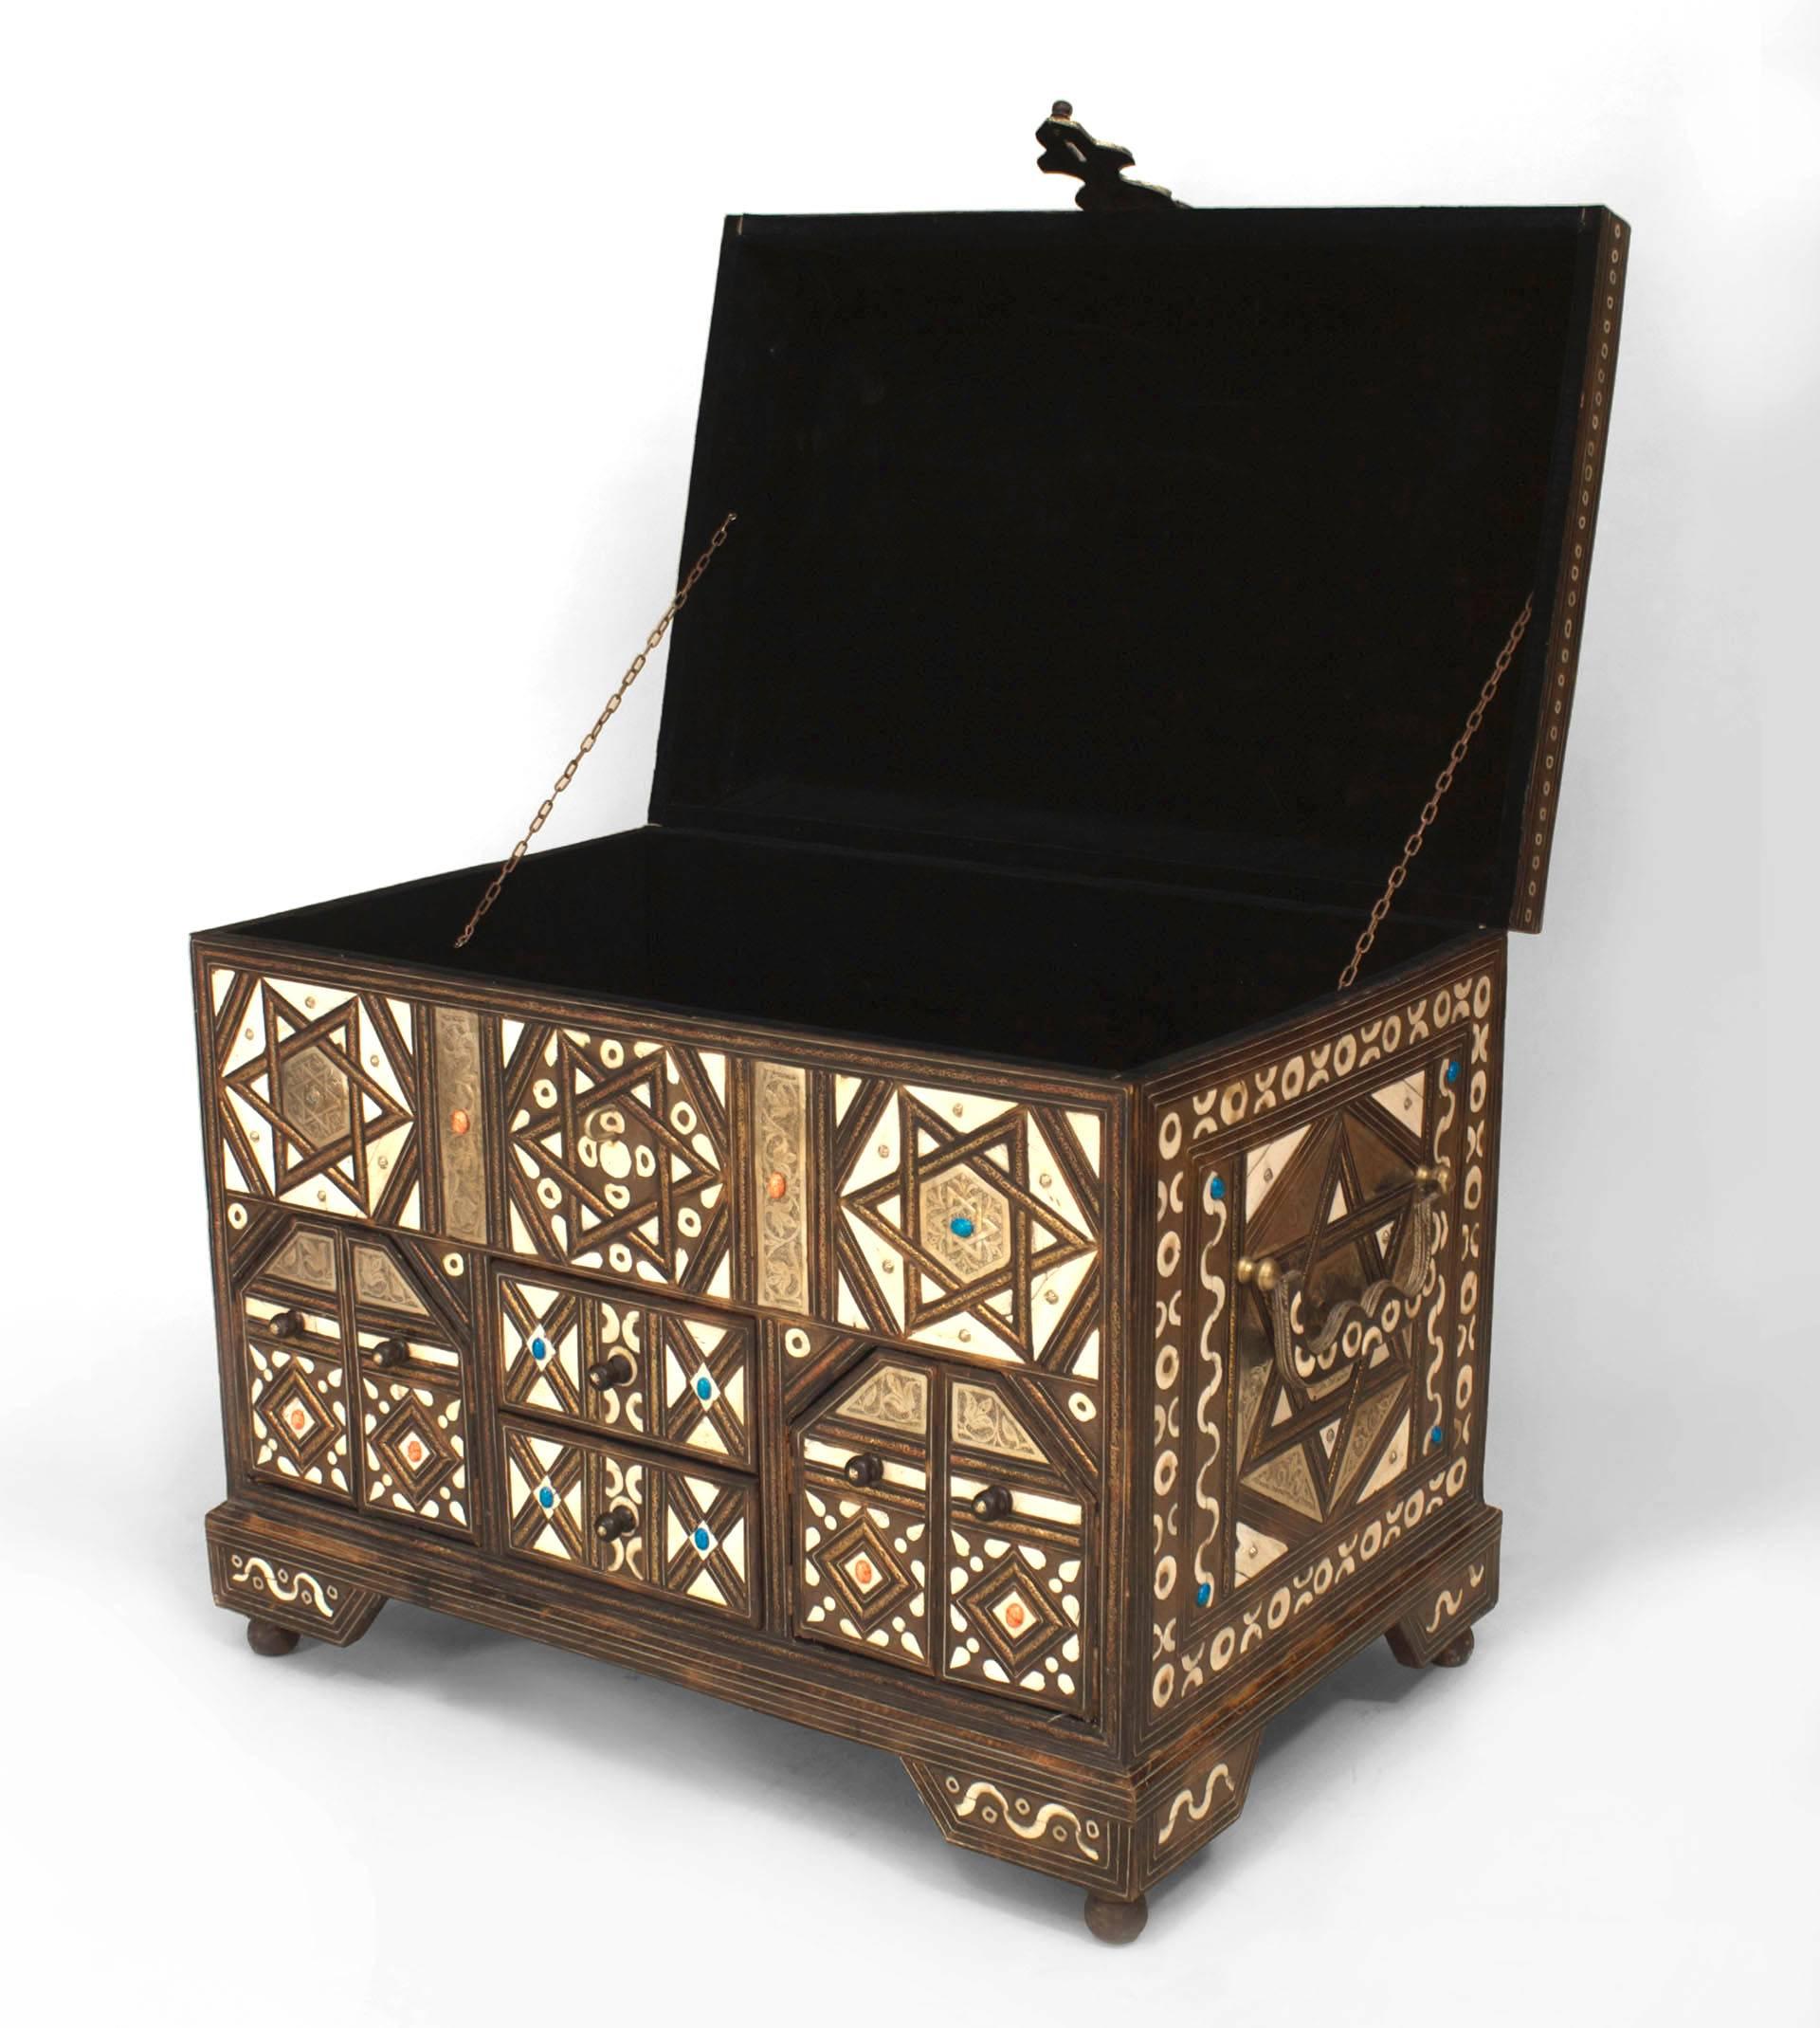 Middle Eastern Moroccan (20th Cent) floor trunk (Torah chest) with Jewish Star of David design & decorated with stones & trimmed with brass, metal, & with large side handles
